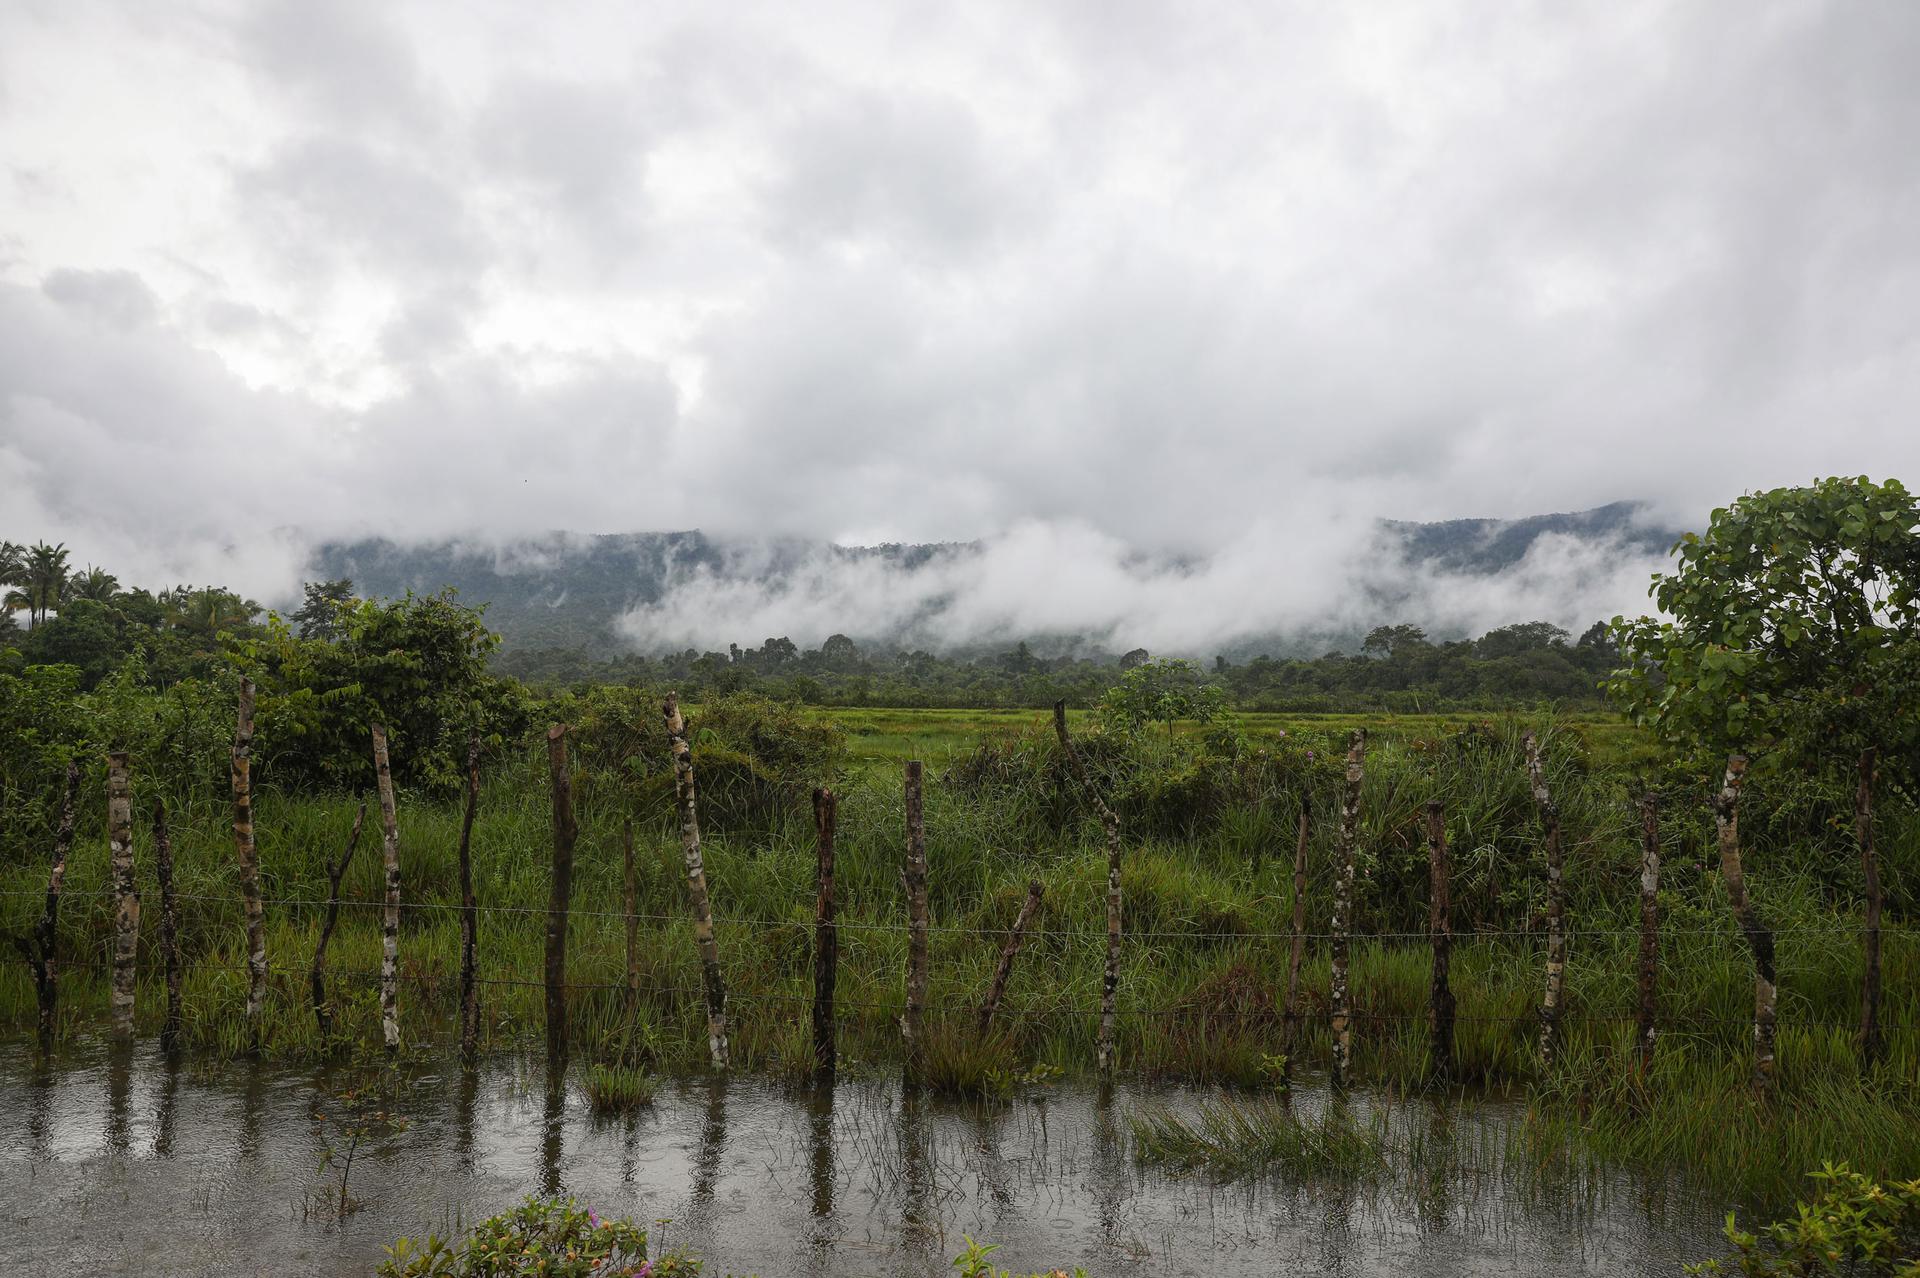 Cambodia’s monsoonal wet season drenches Toap Khley village in the Southern Cardamom National Park’s Areng Valley.